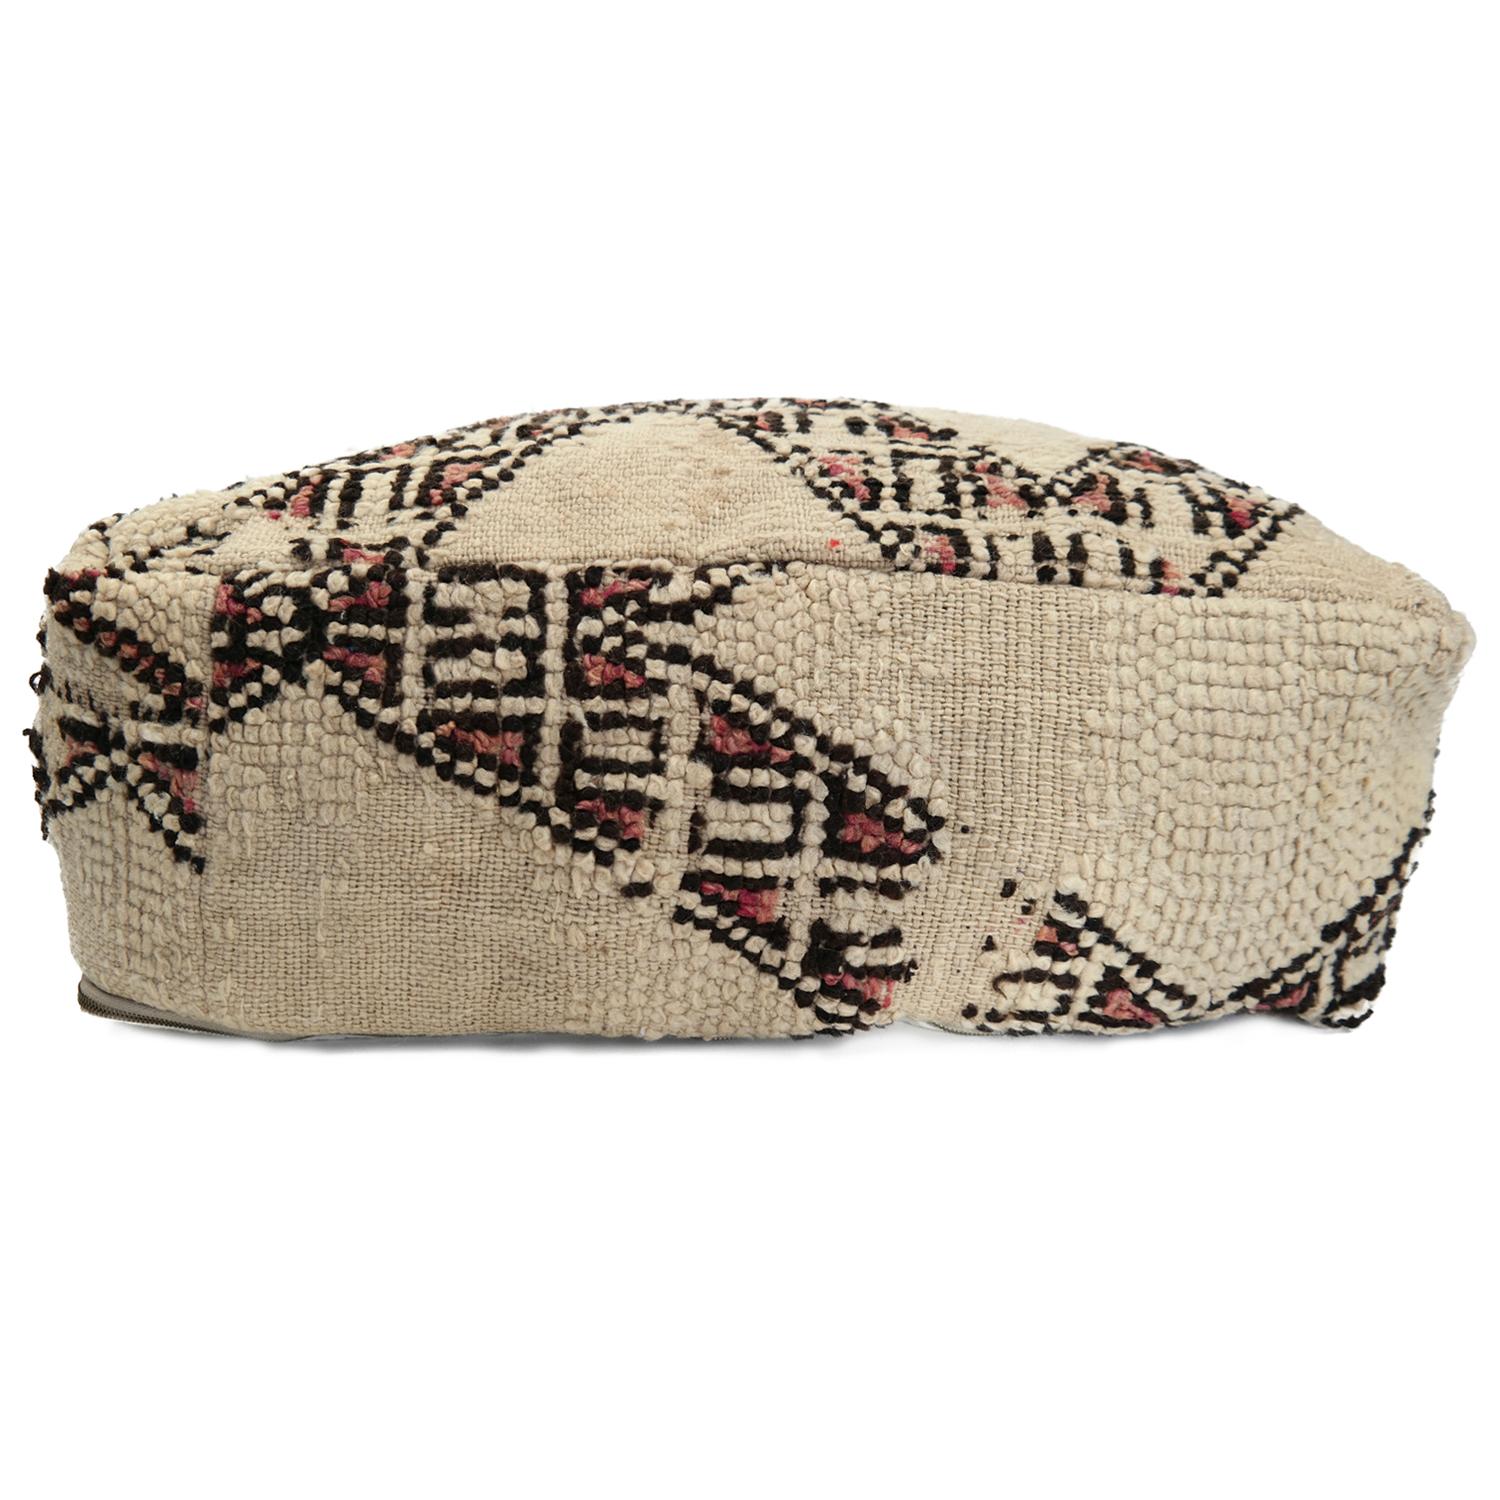 Hand-Knotted Pouf from Morocco Natural Floor Cushion Moroccan Ottoman For Sale